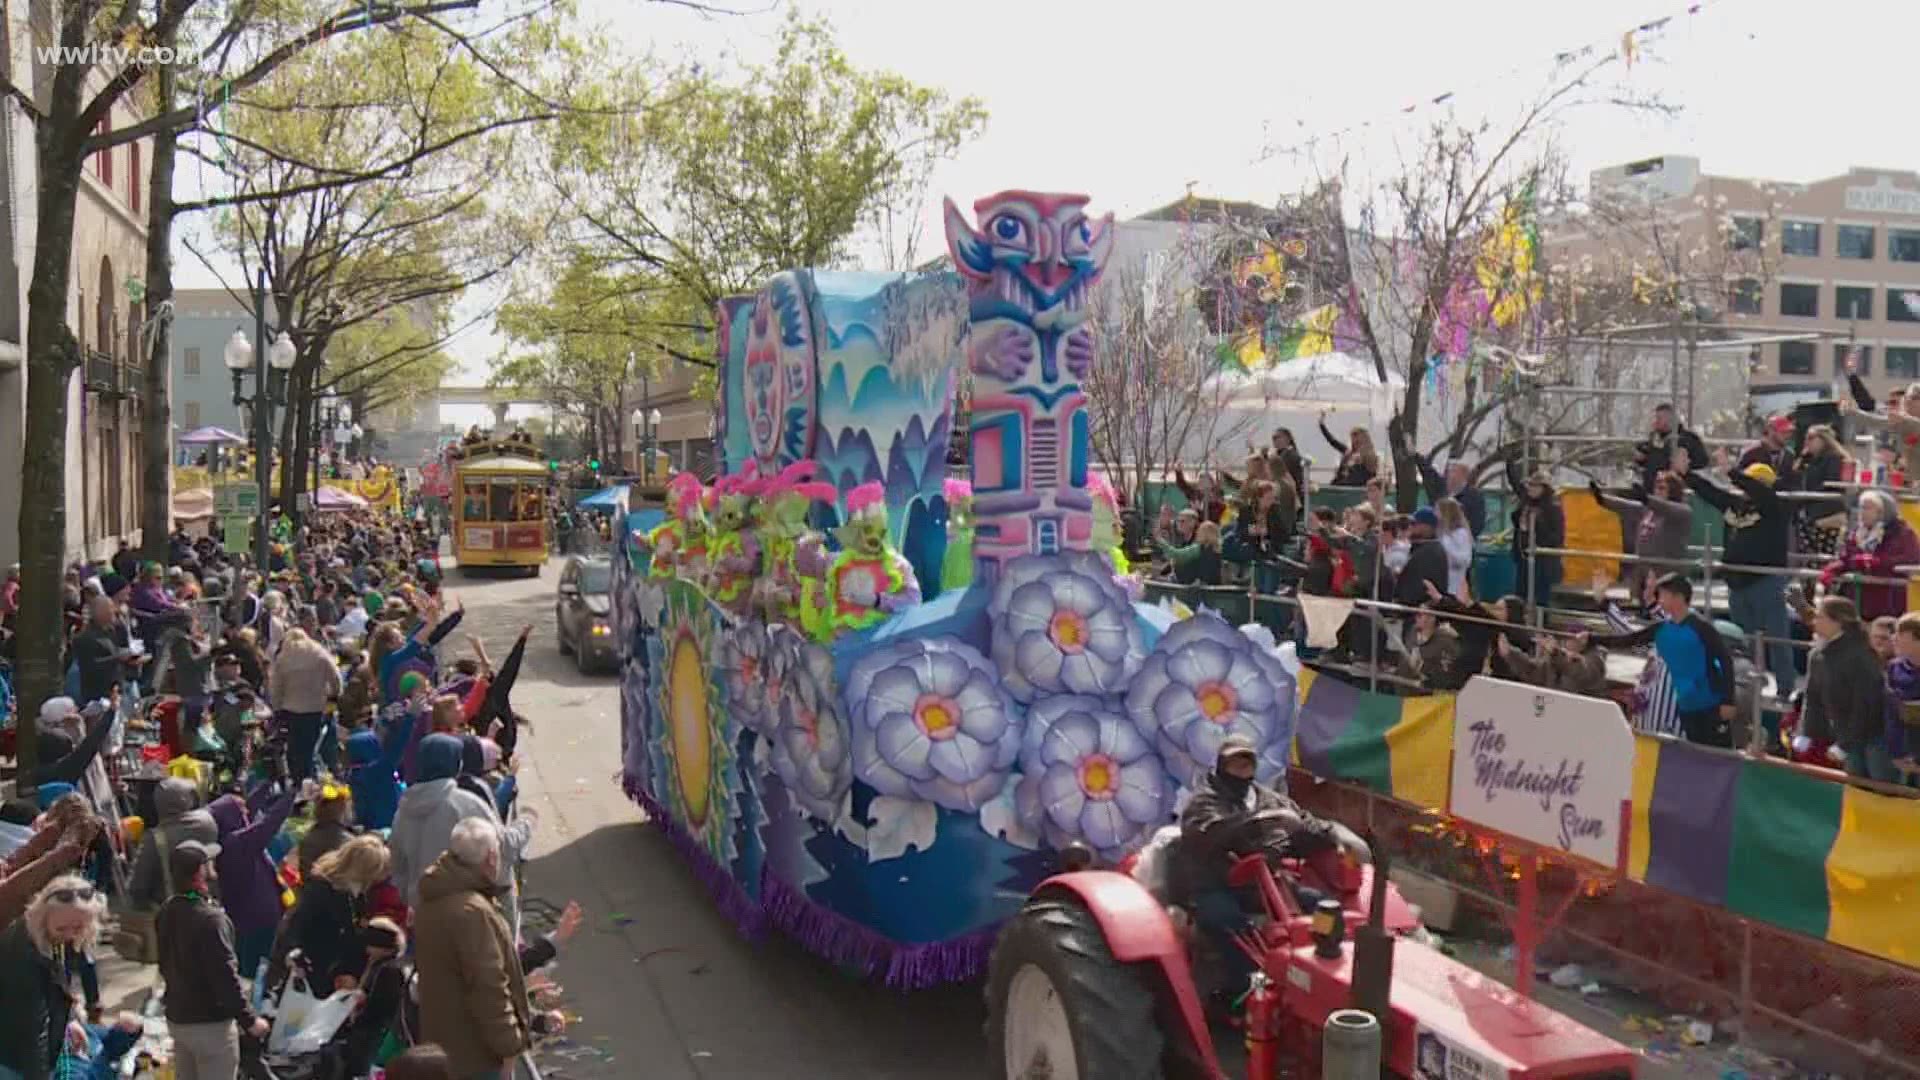 Crews are making plans to carry on with Mardi Gras in 2021 but with a safe approach.